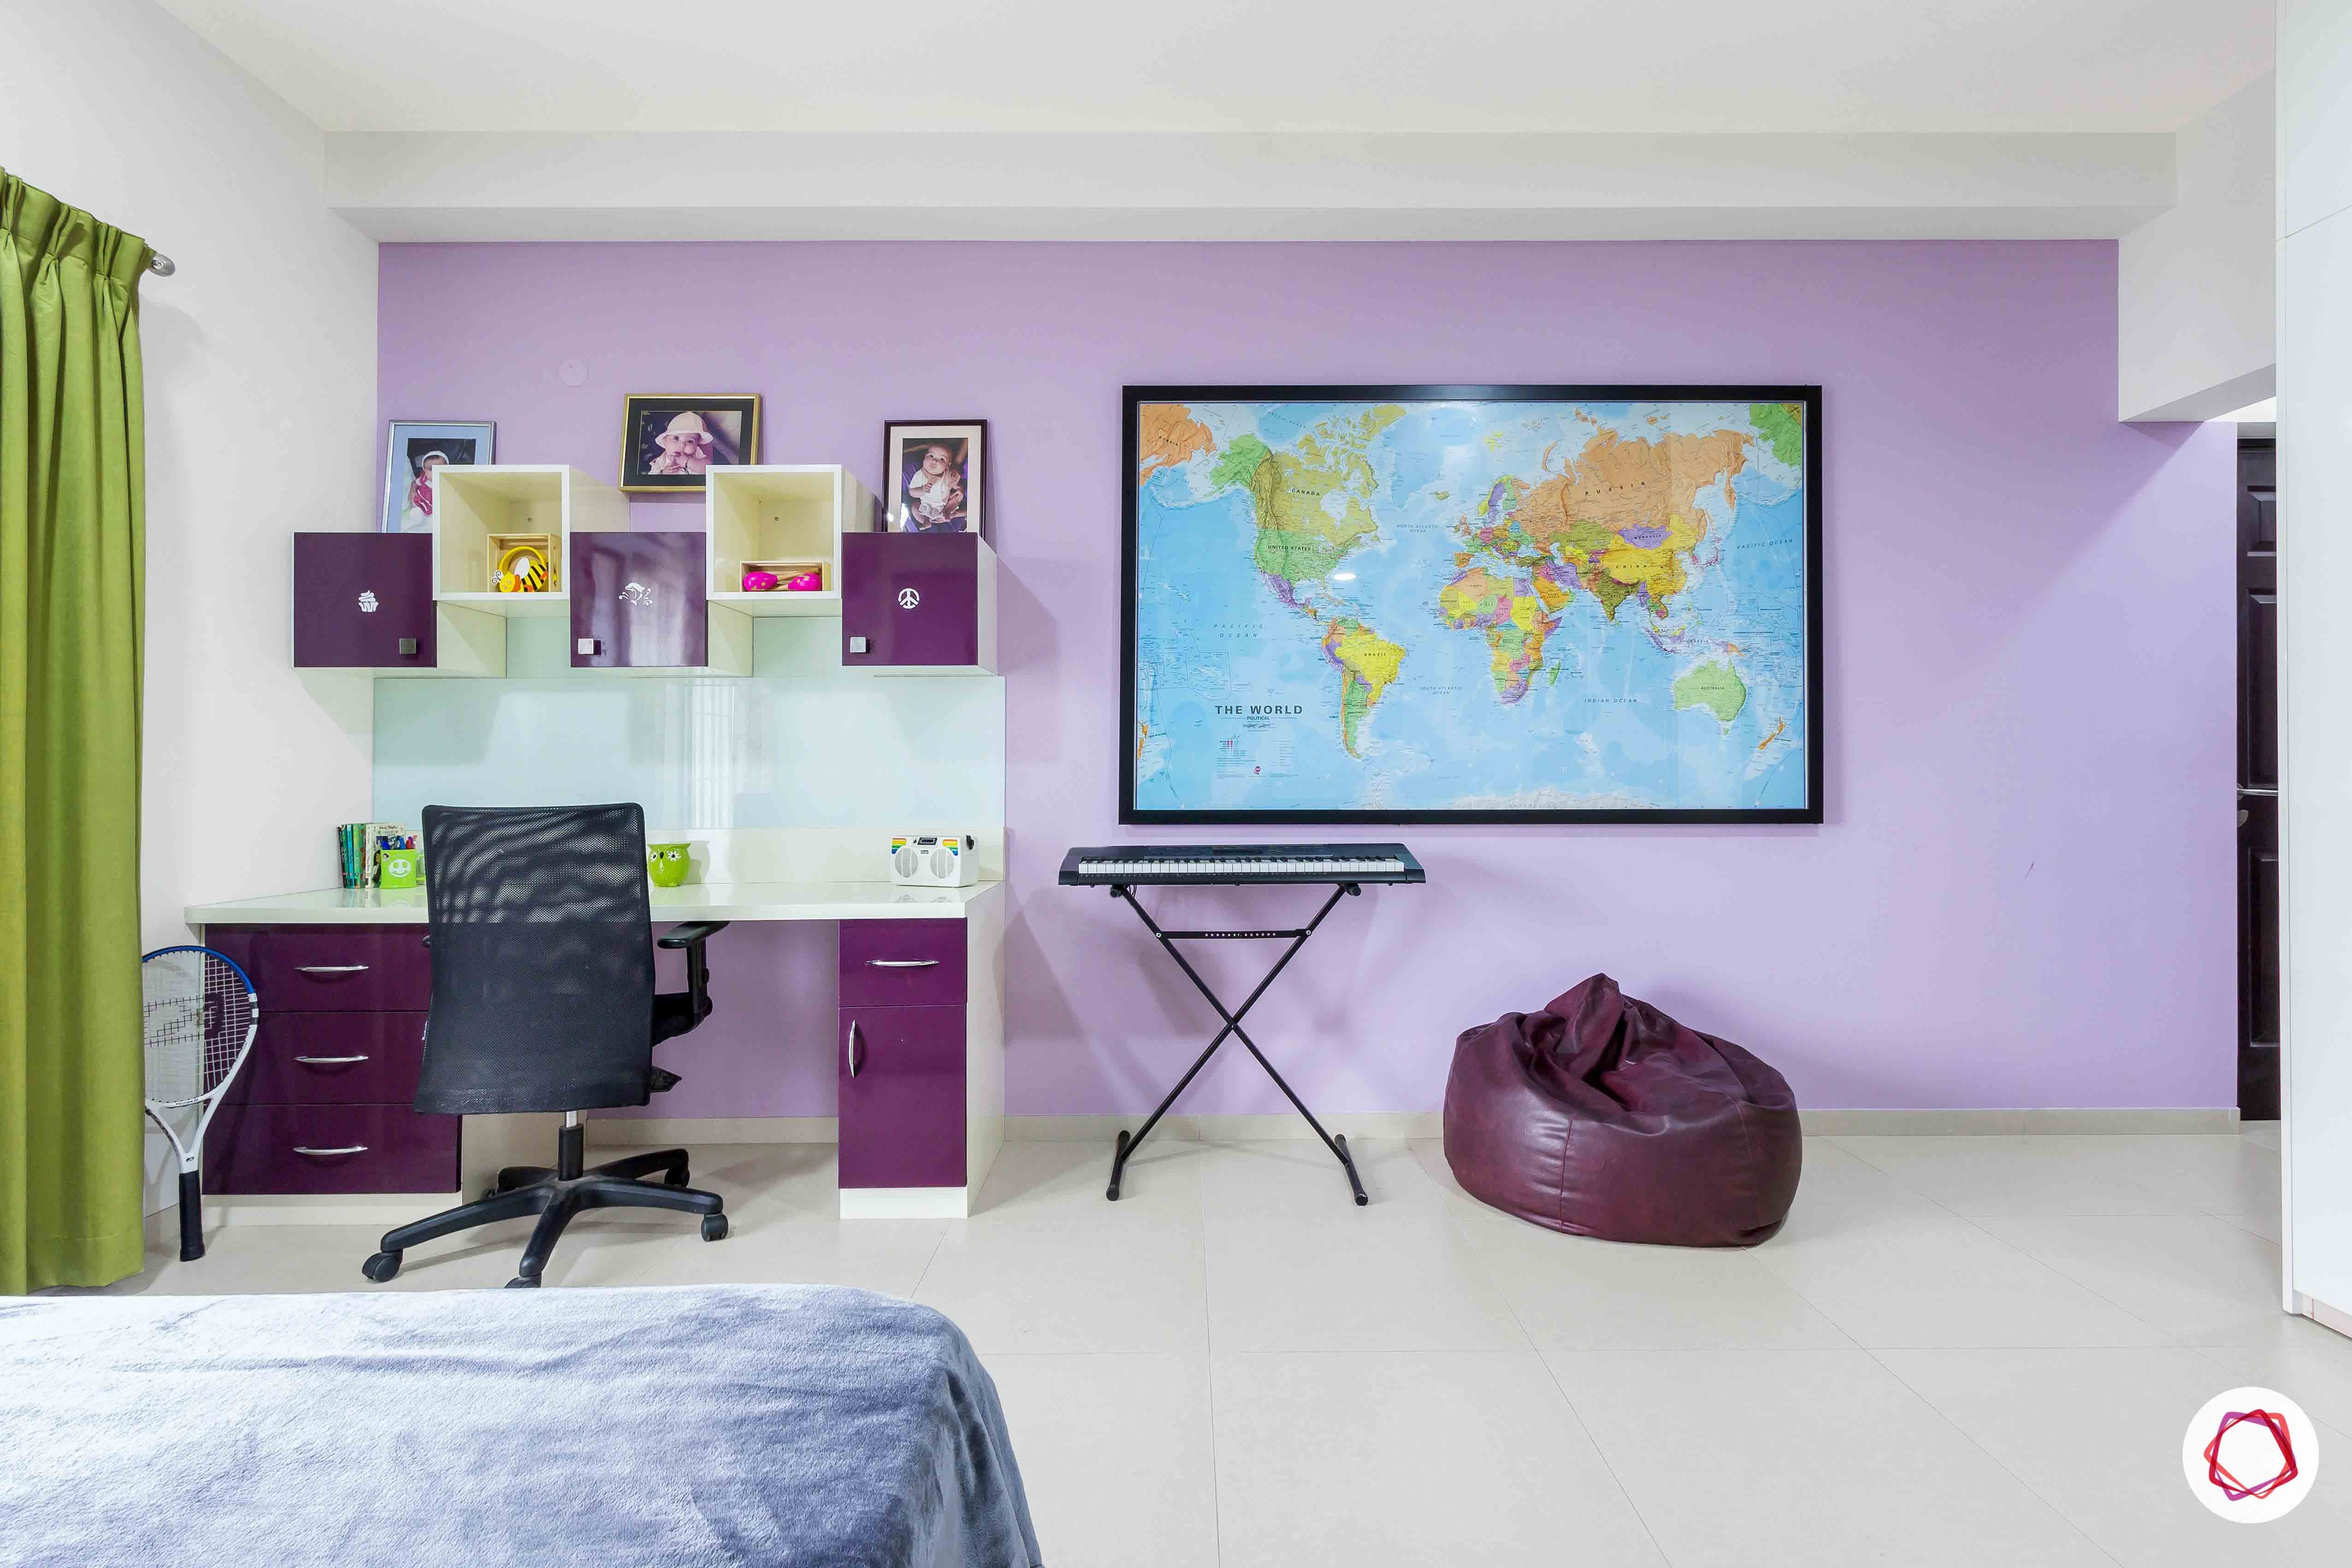 sobha forest view-daughter’s bedroom-purple room-purple wall-study table-world map